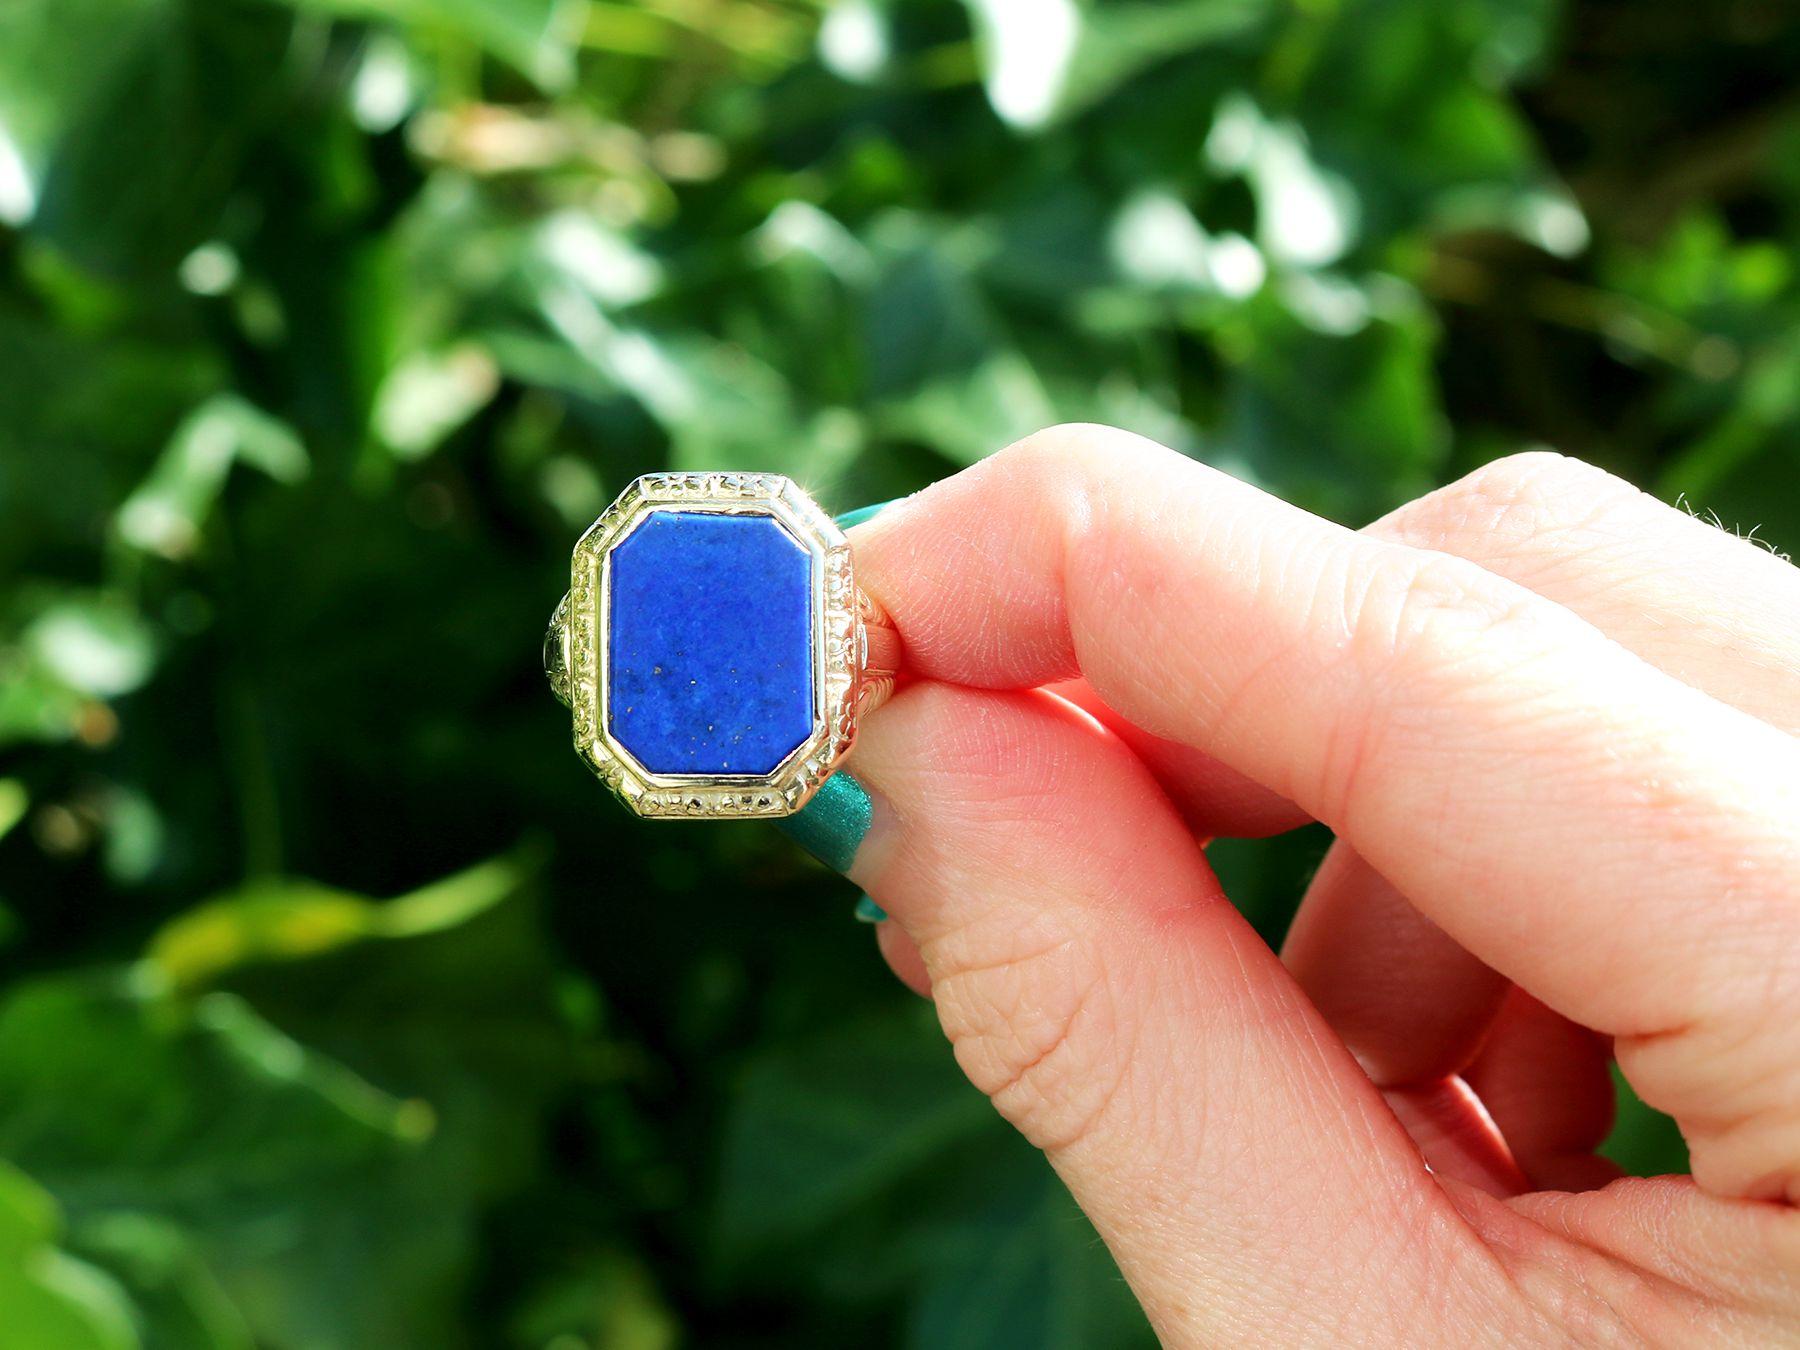 An exceptional, fine and impressive 2.21 Carat lapis lazuli and 14 karat yellow gold signet ring; part of our diverse antique jewelry and estate jewelry collections.

This exceptional, fine and impressive antique ring has been crafted in 14k yellow